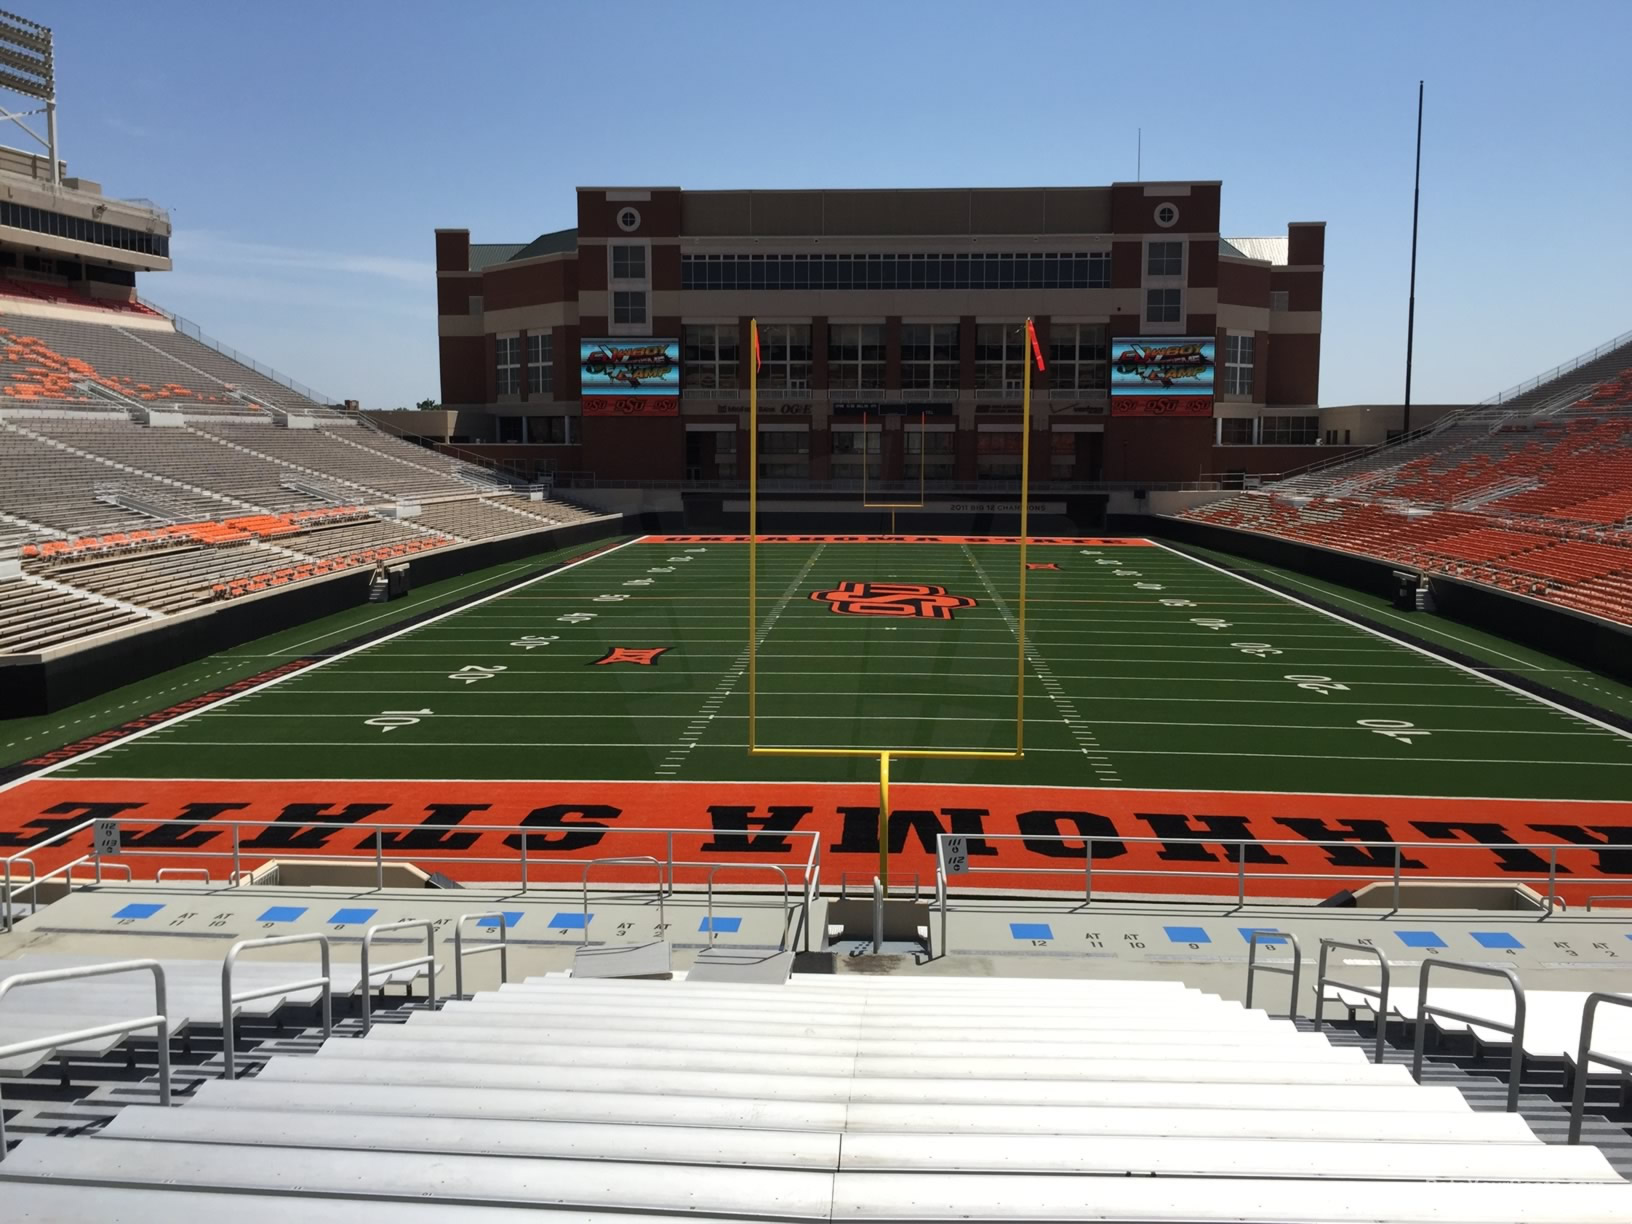 section 216, row 20 seat view  - boone pickens stadium